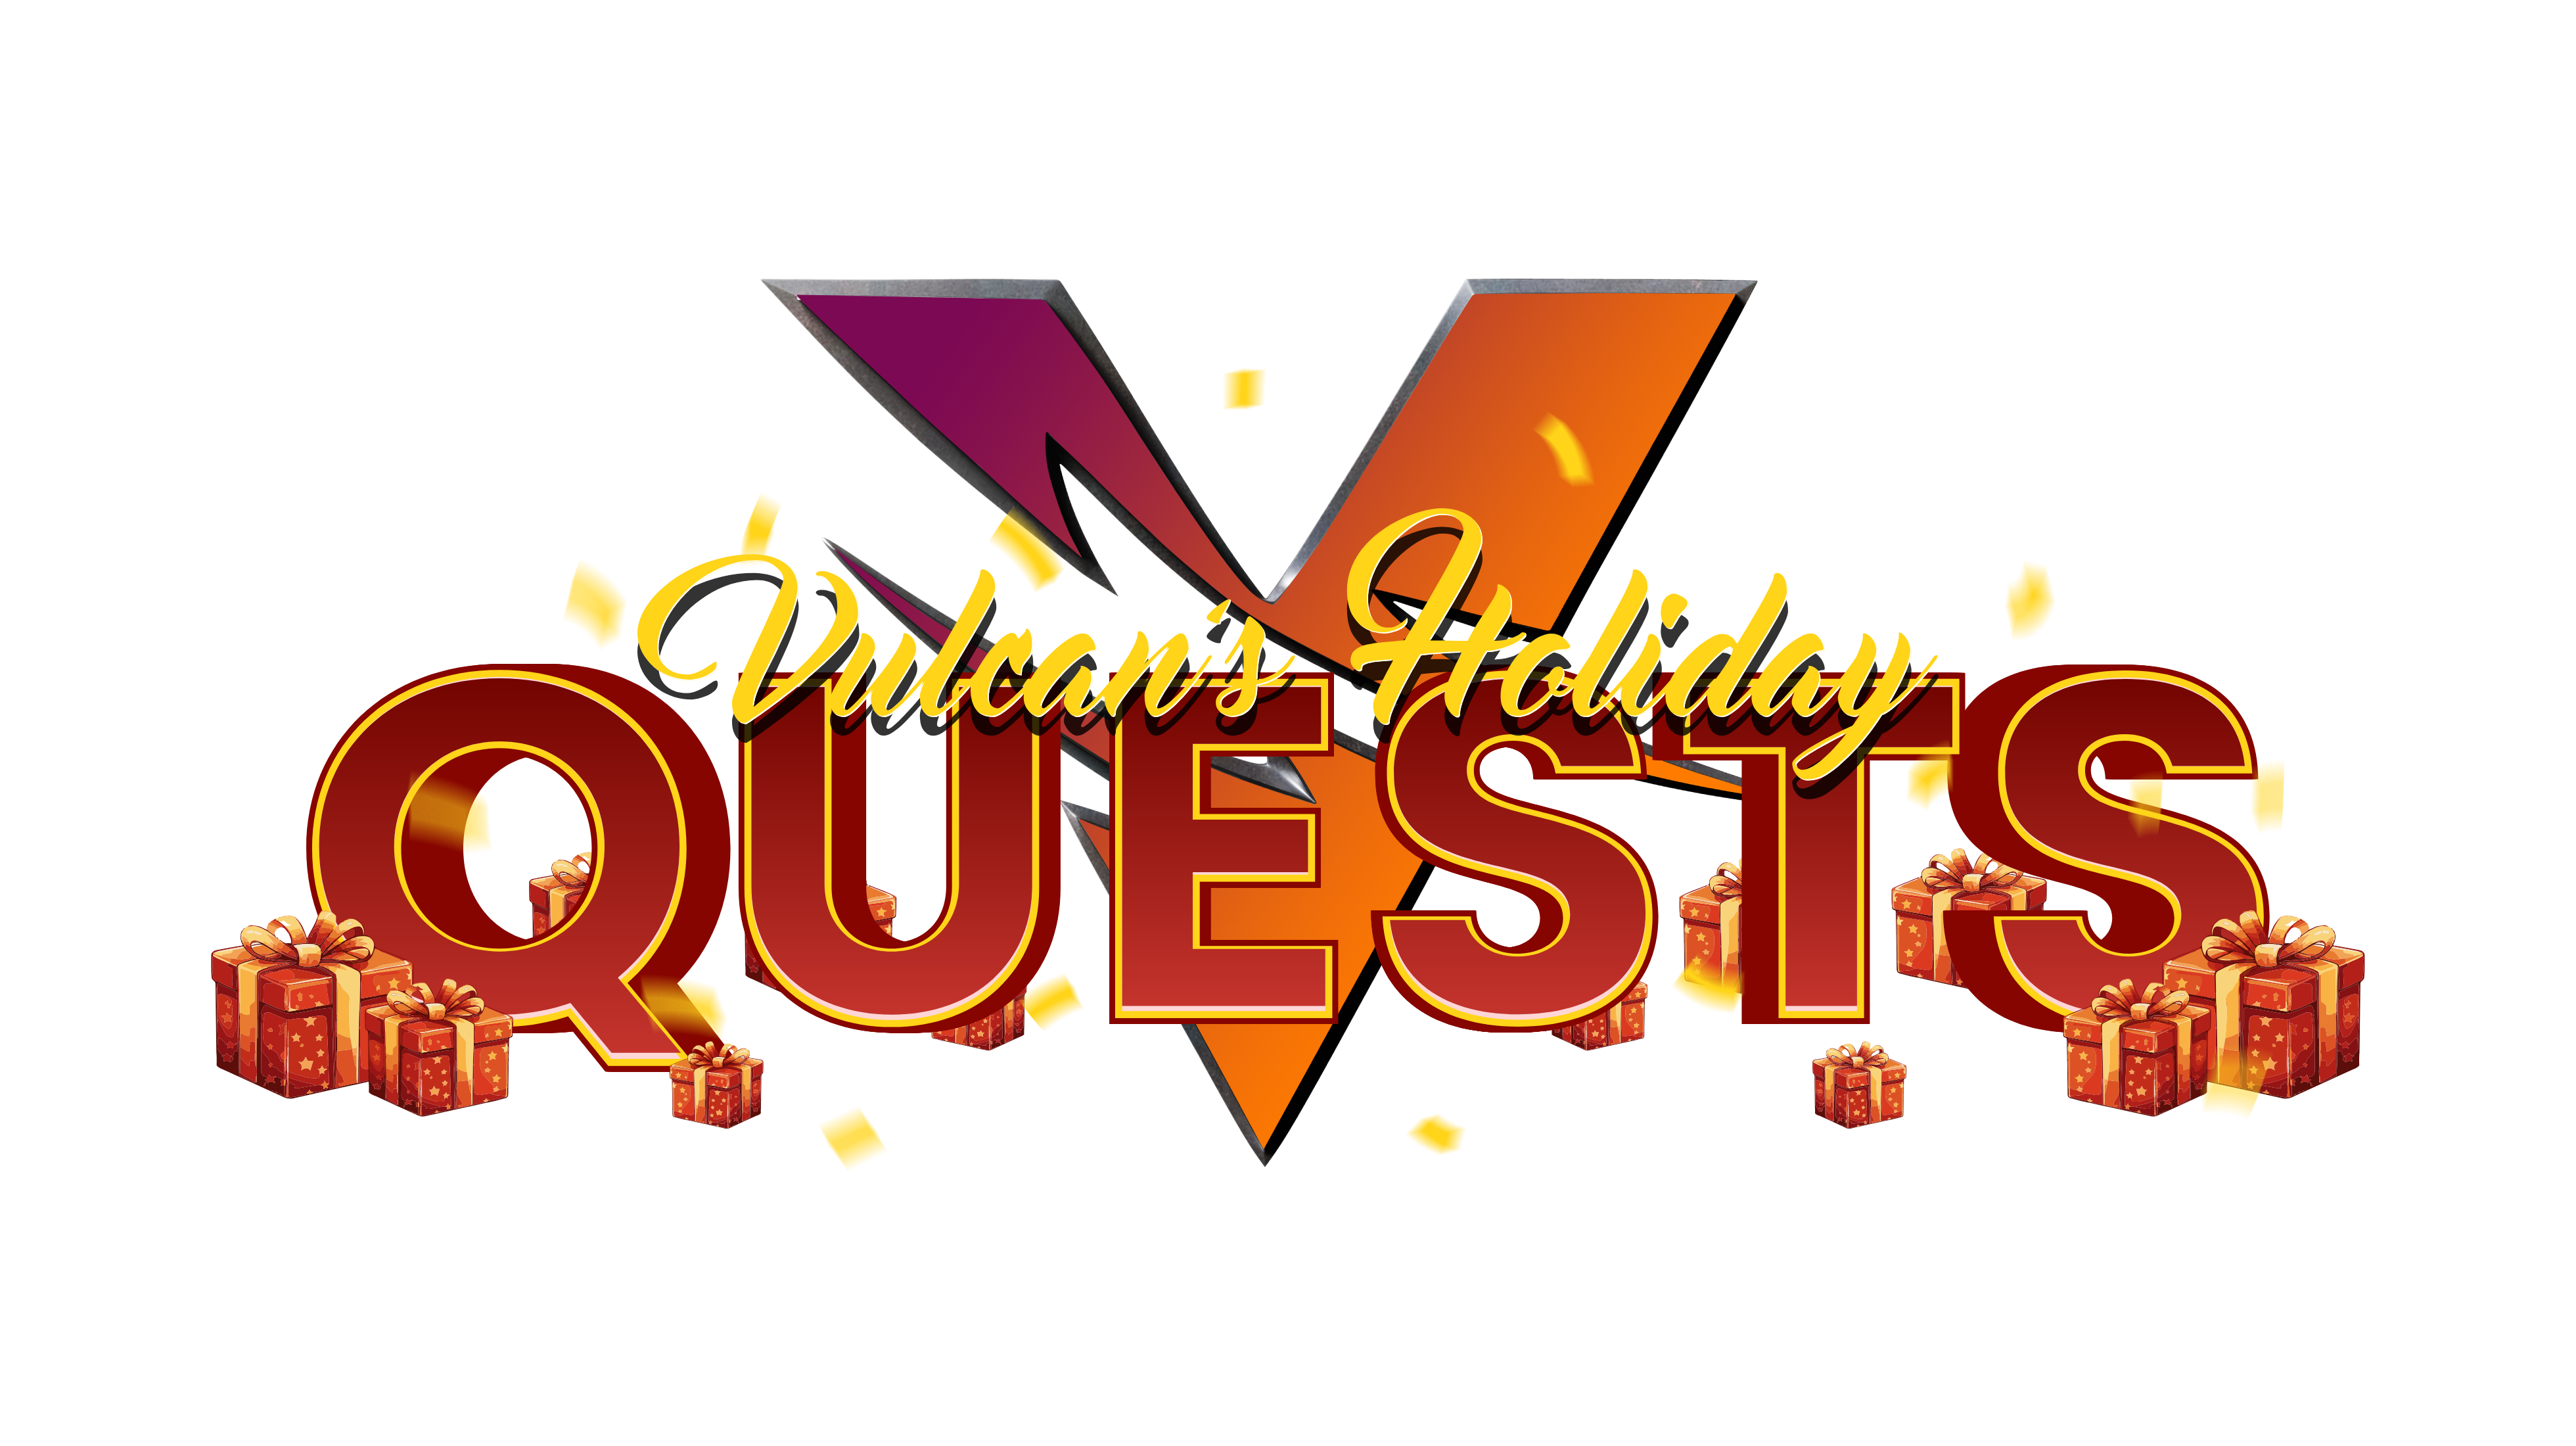 Vulcan Forged 12 Quests of Christmas Event - Play to Earn